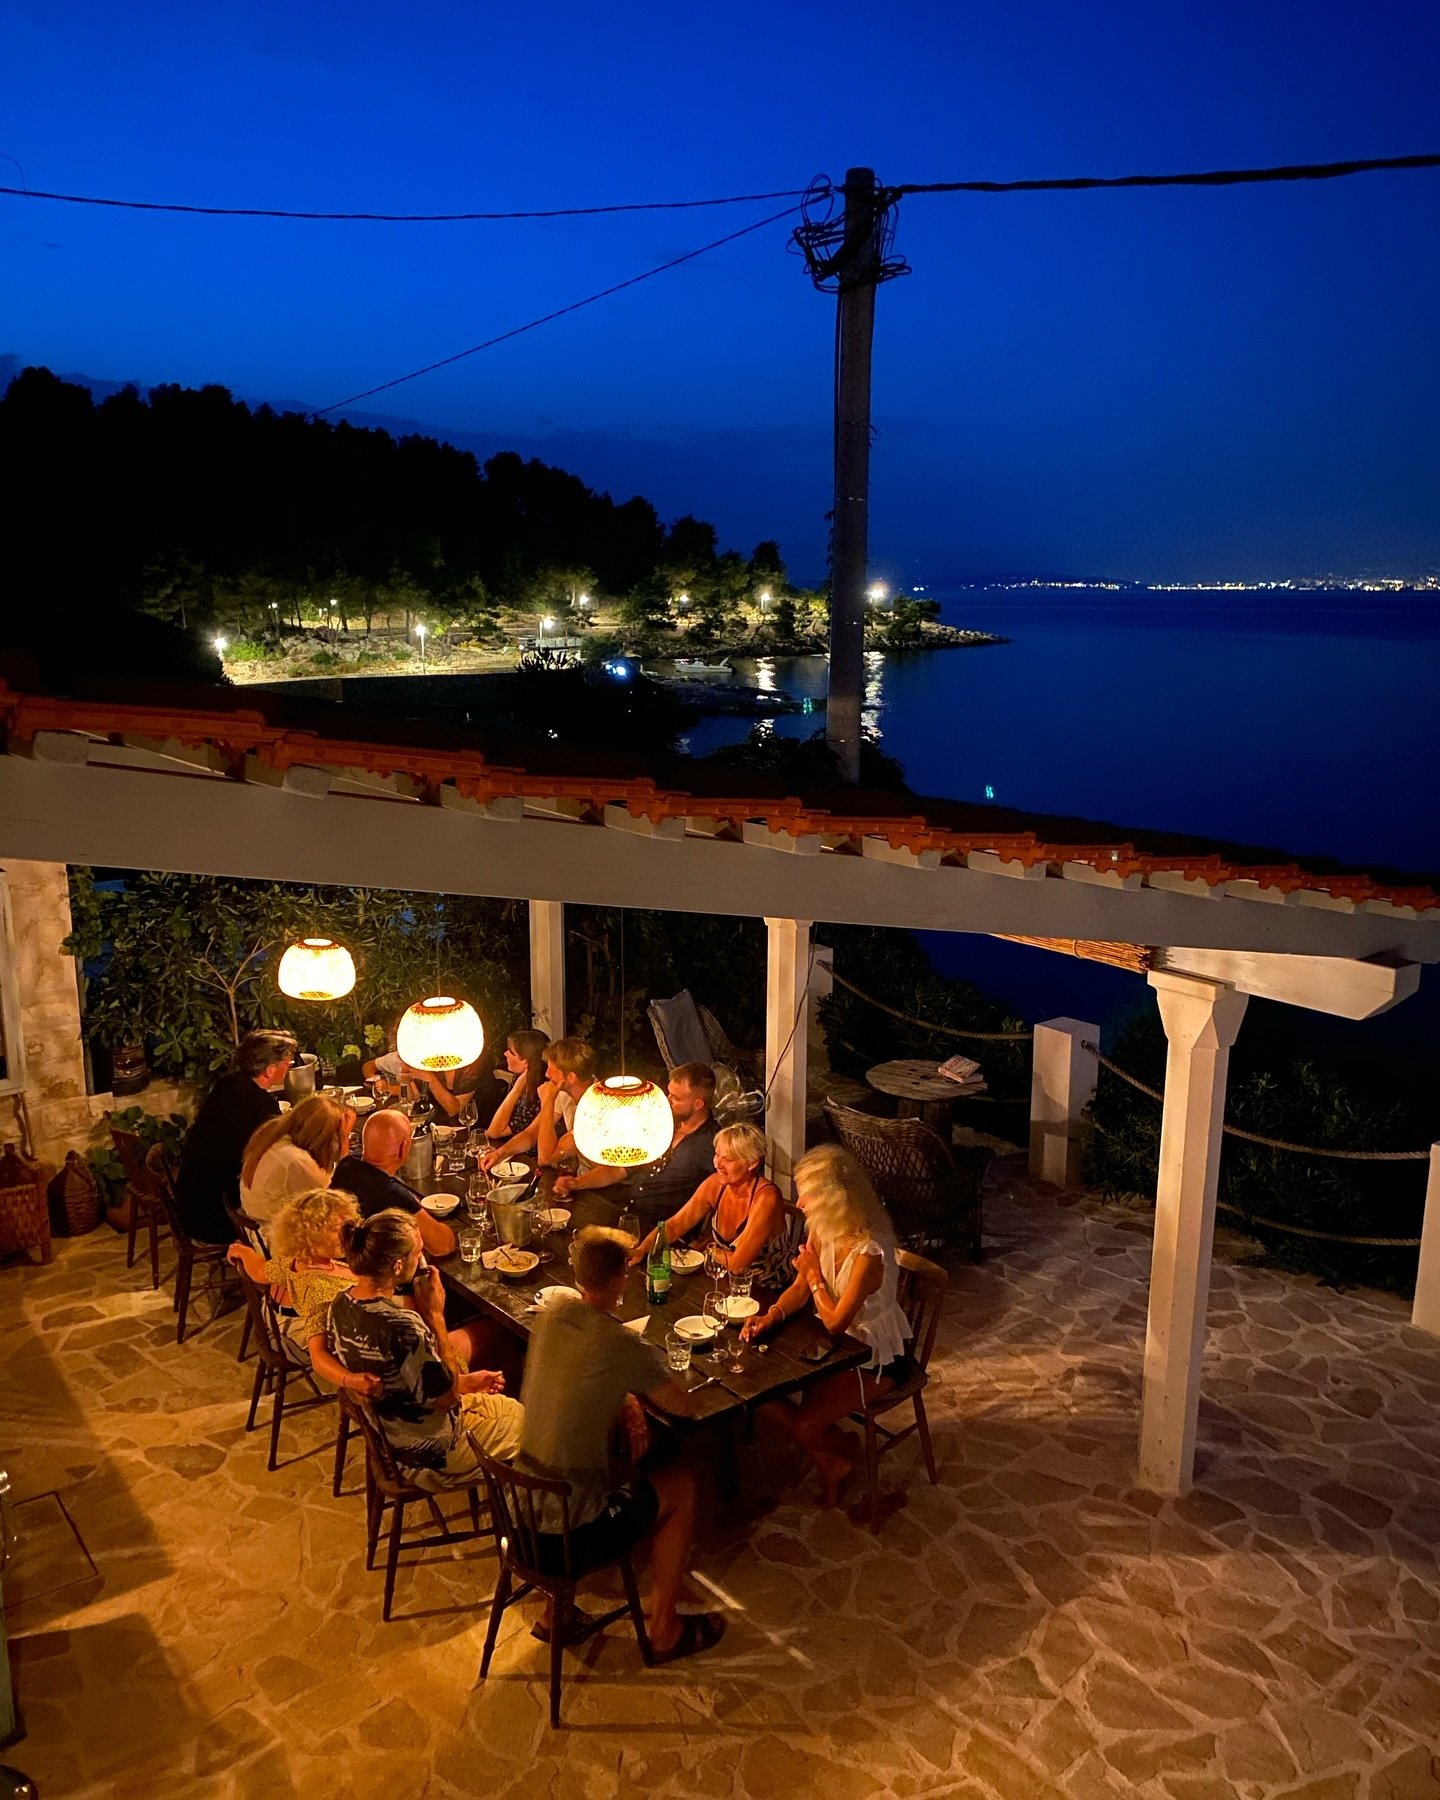 One long table, plenty of good people and great food from the kitchen. No need to say, why we love evenings at Gone, right?

#gonesolta
#long #table #dinners
#travel #traveling #travelpics #travelInspiration 
#vacation #vacations #vacationmode #vacat